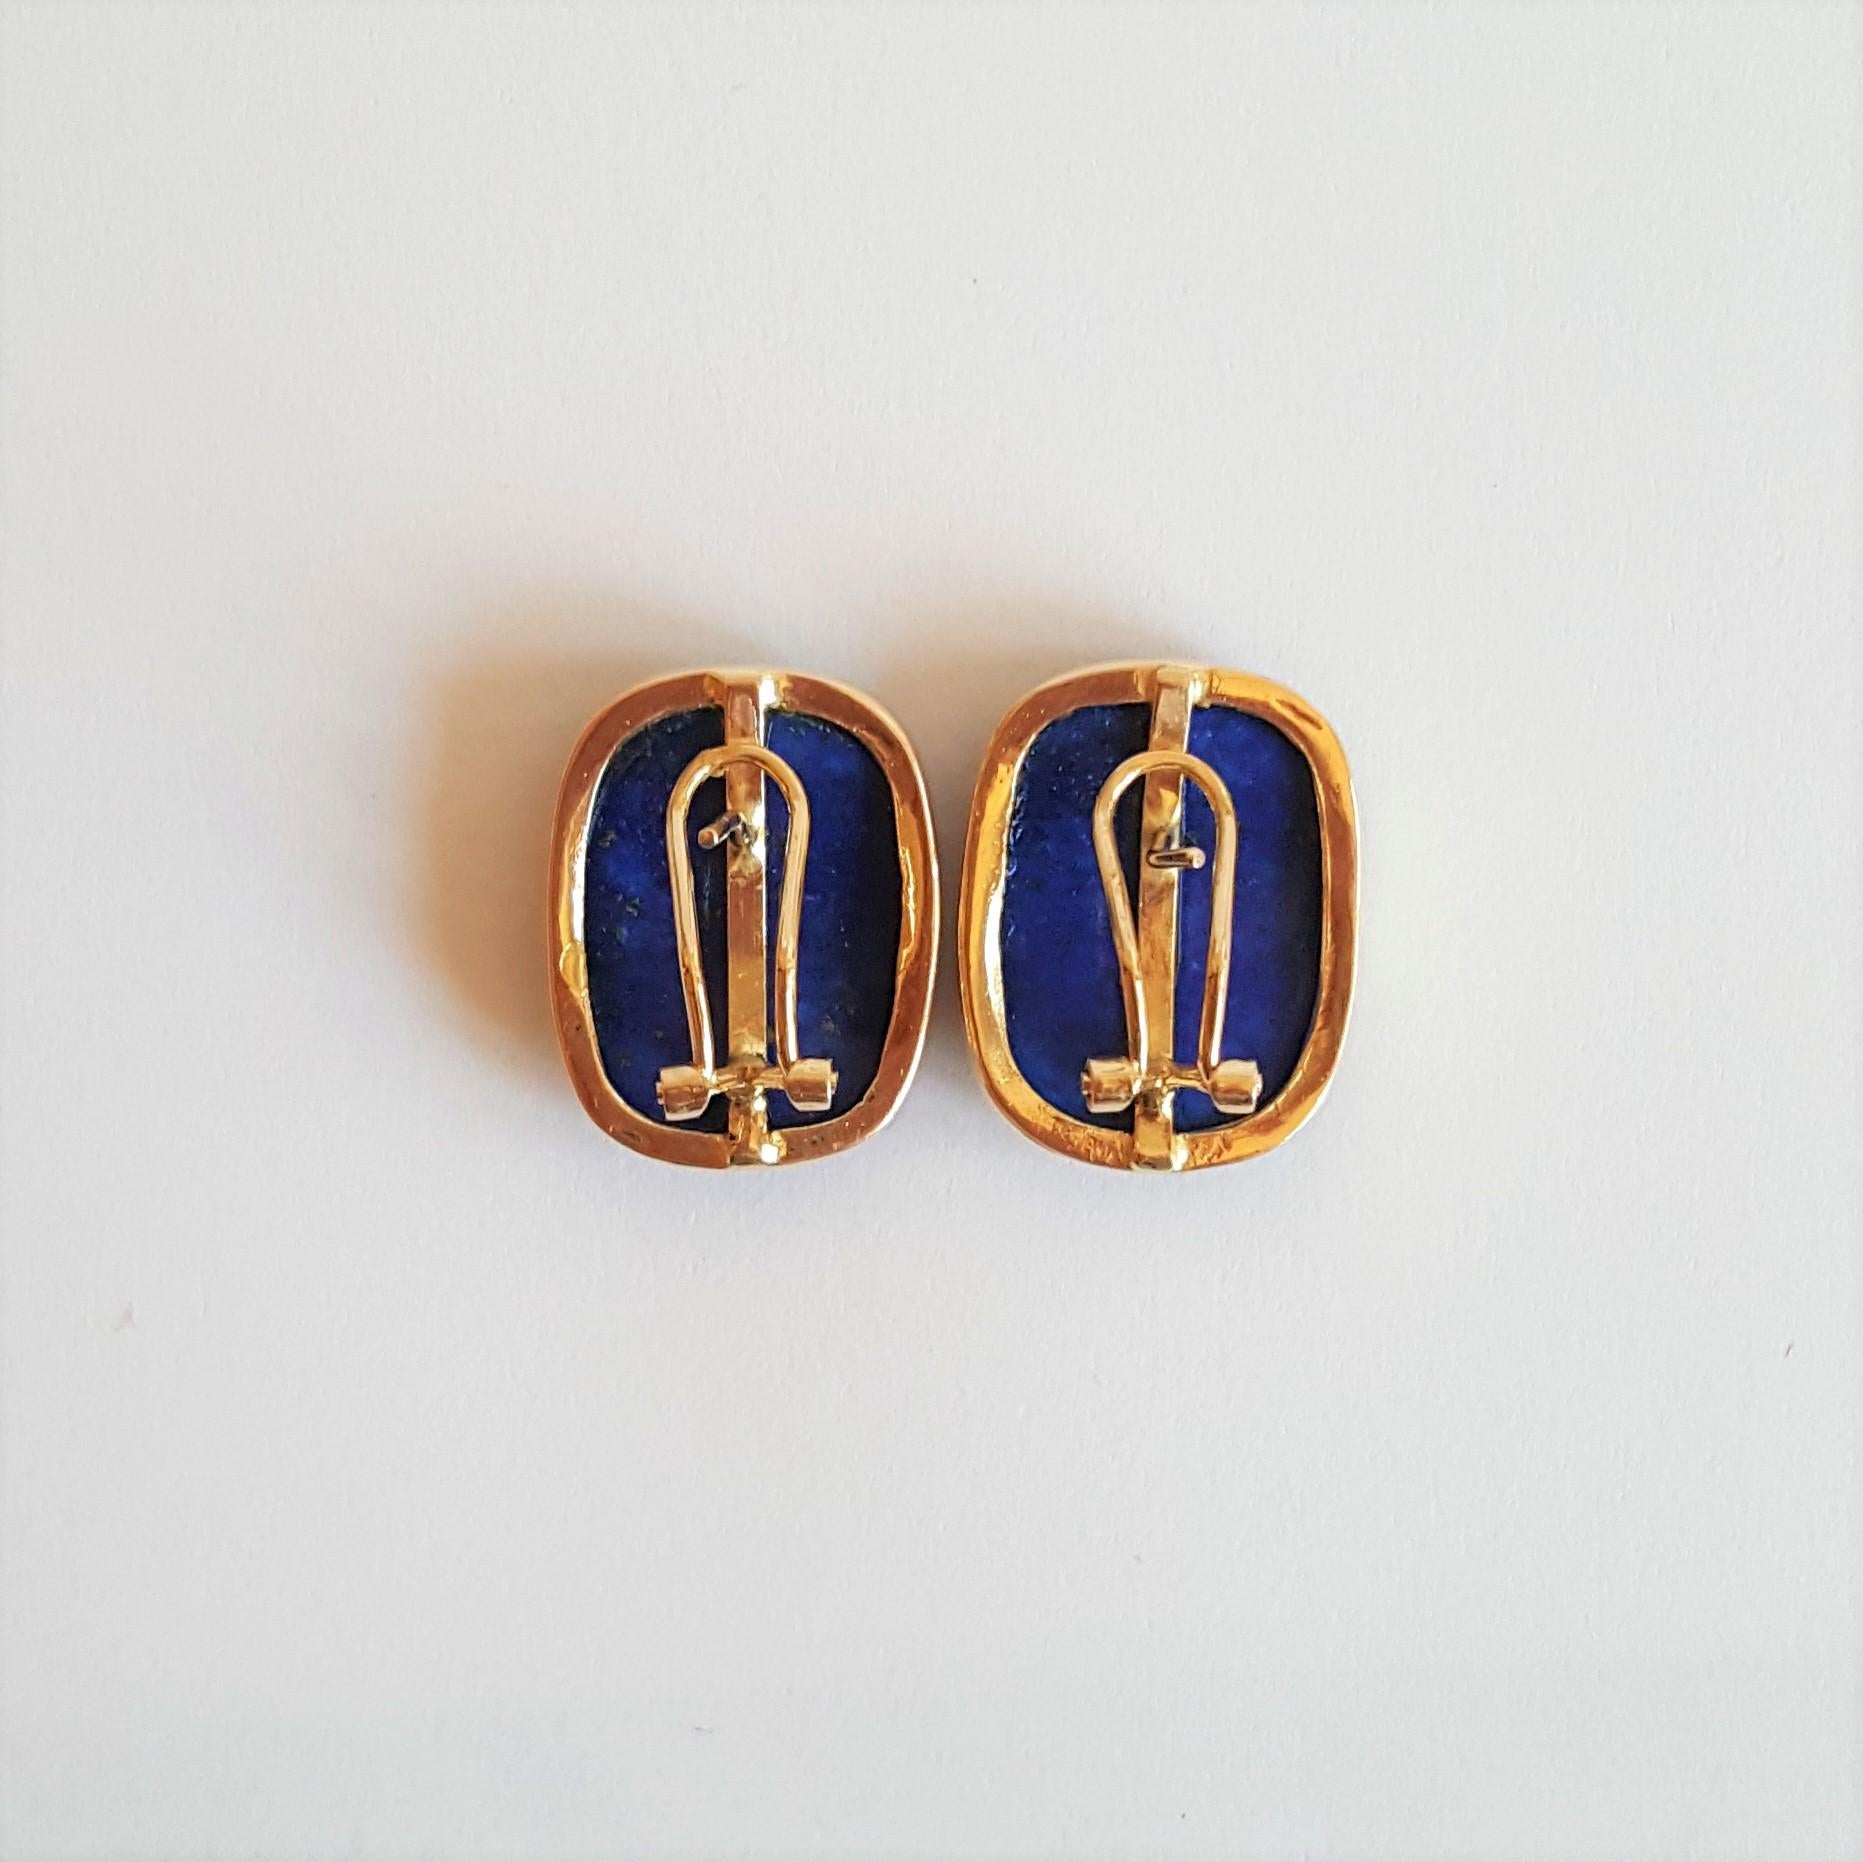 14kt Yellow Gold Lapis Lazuli Earrings, Beautiful Condition, 21mm x 16m Size, Friction Post with Omega Backing, Stamped 14kt, 8.7 grams

These earrings are in beautiful condition and well cared for; they appear to be hardly worn. 

Please let us